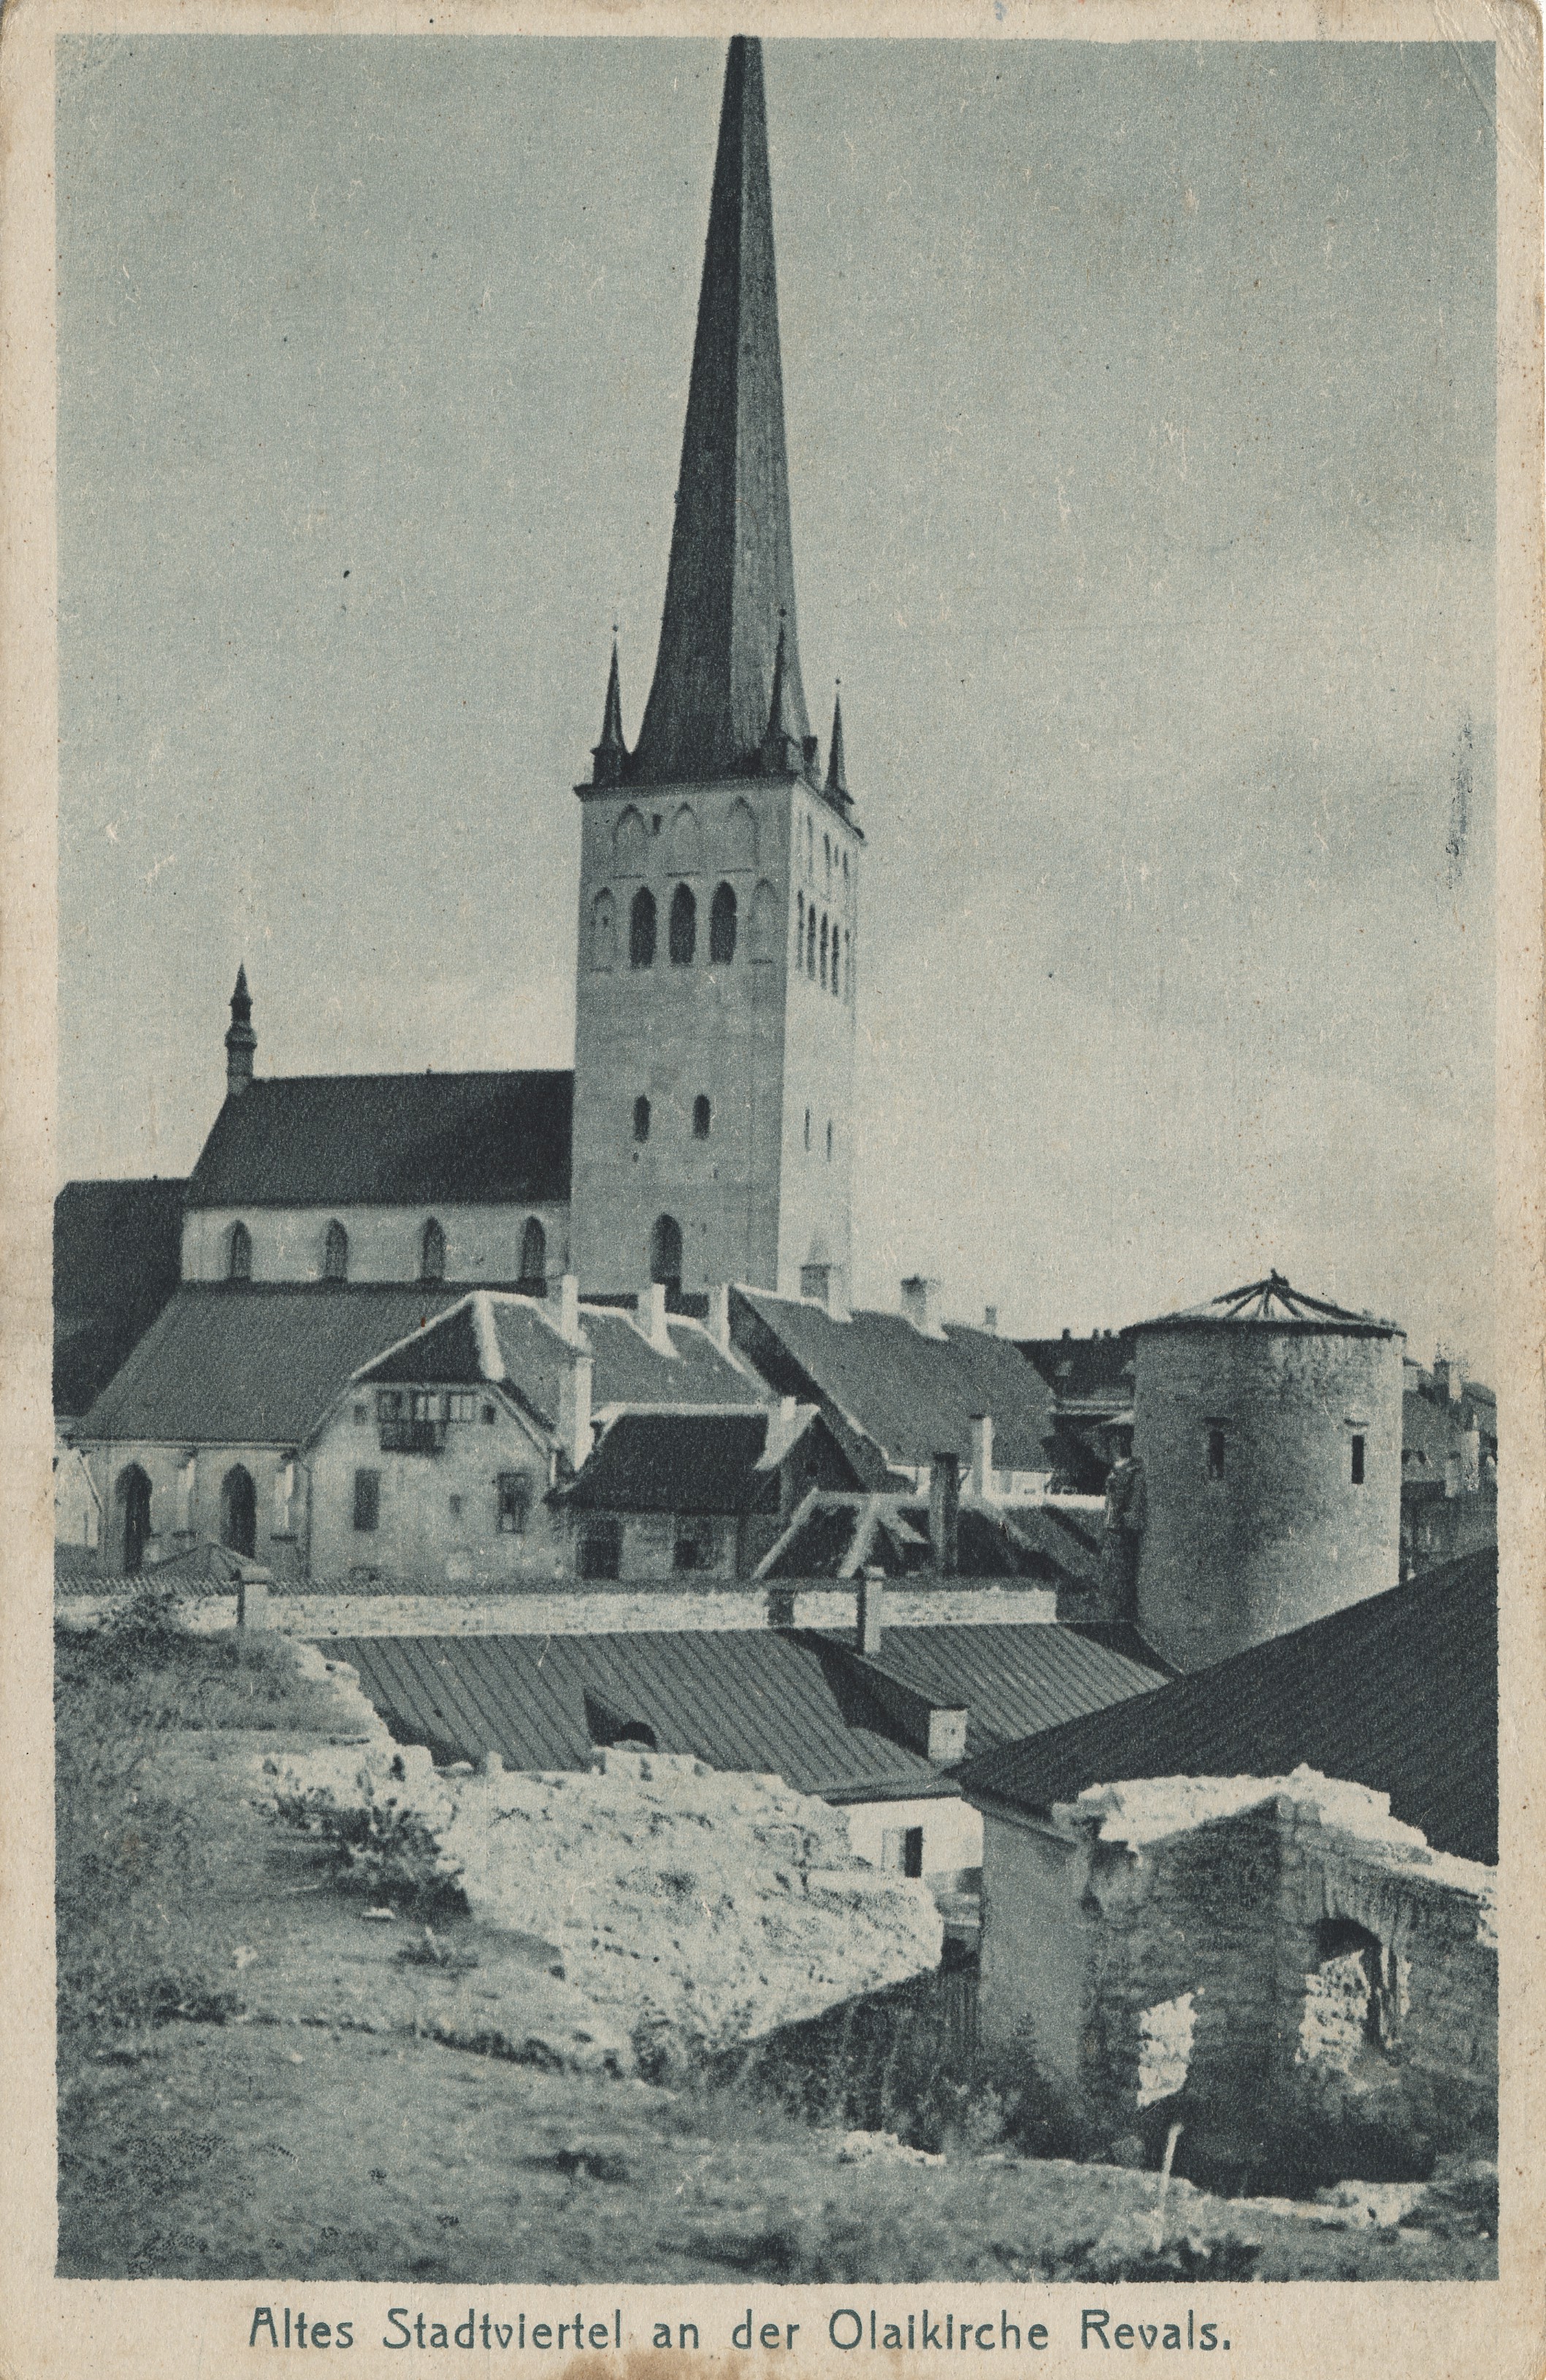 Old Townquarter at the Olaikirche Revals